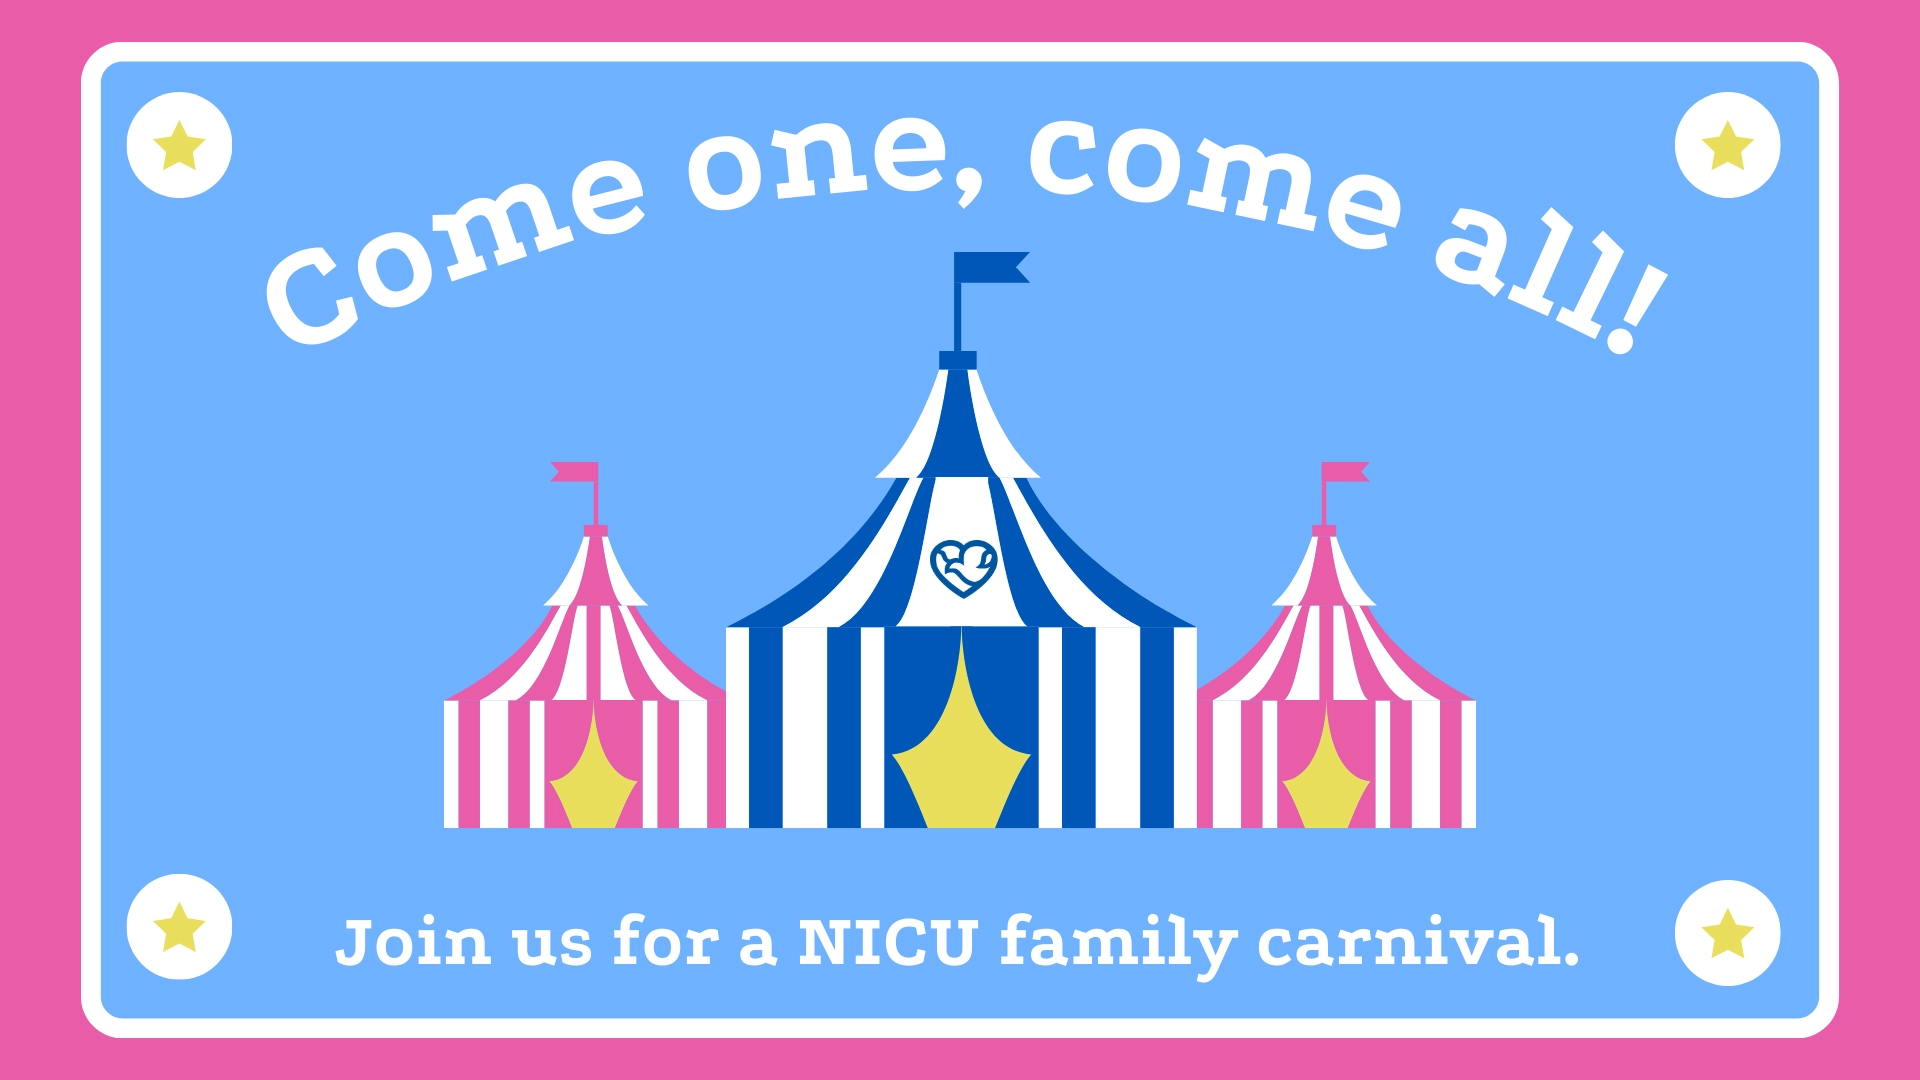 Come one, come all! Join us for a NICU family carnival.